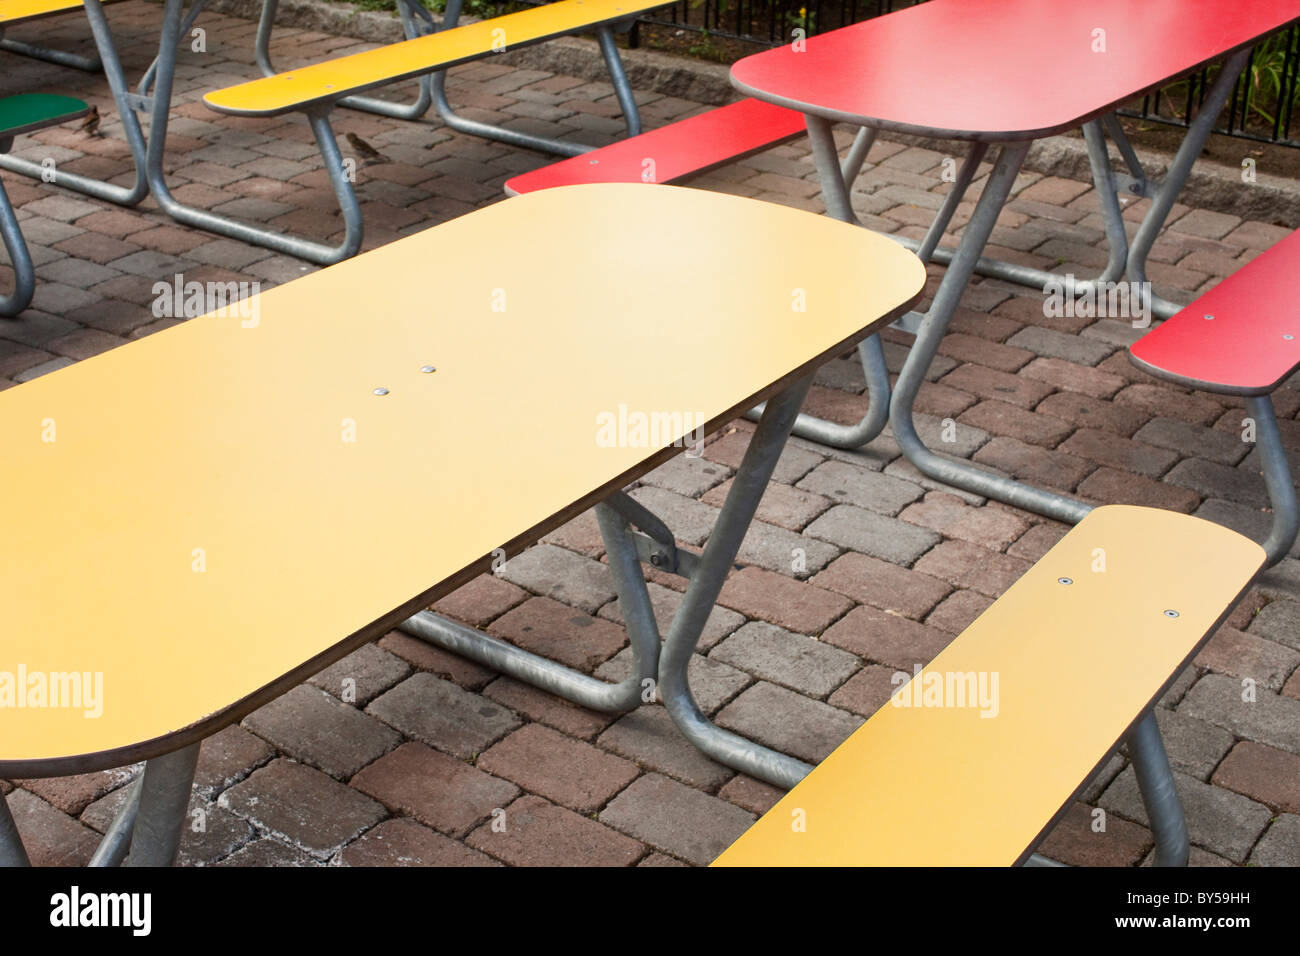 Tables and benches on a patio Stock Photo